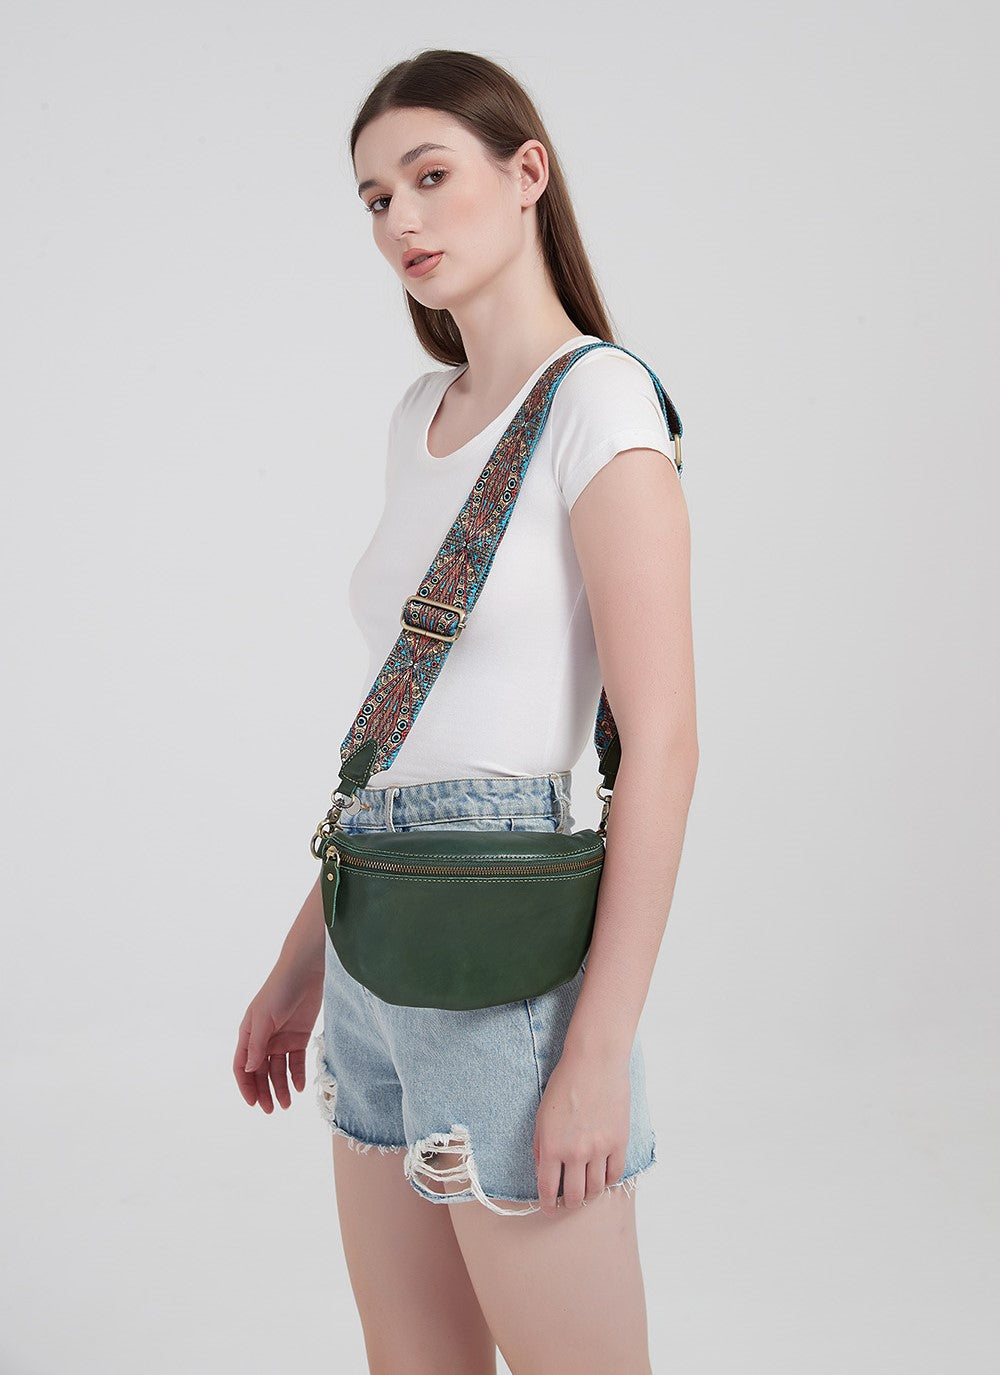 HIMODA wax leather fanny pack- woven strap-green 1